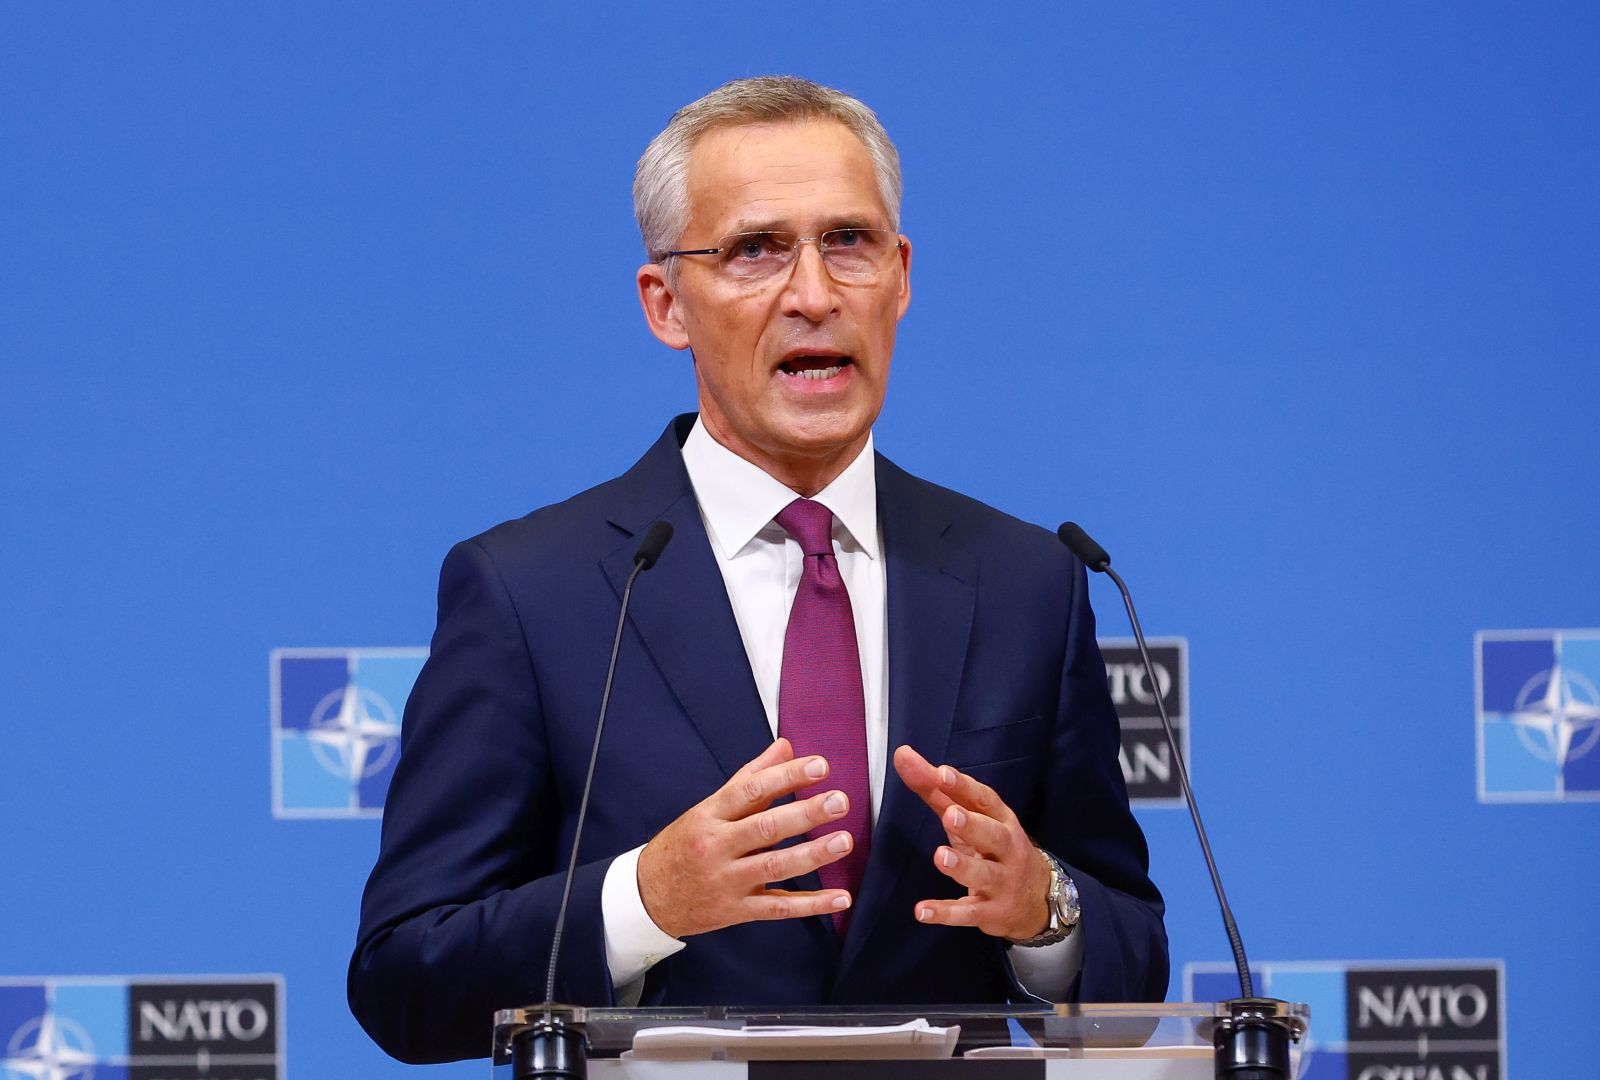 epa10240953 NATO Secretary General Jens Stoltenberg gives a press conference at the end of the second day of a NATO Council Defense Ministers at the Alliance headquarters in Brussels, Belgium, 13 October 2022.  EPA/STEPHANIE LECOCQ